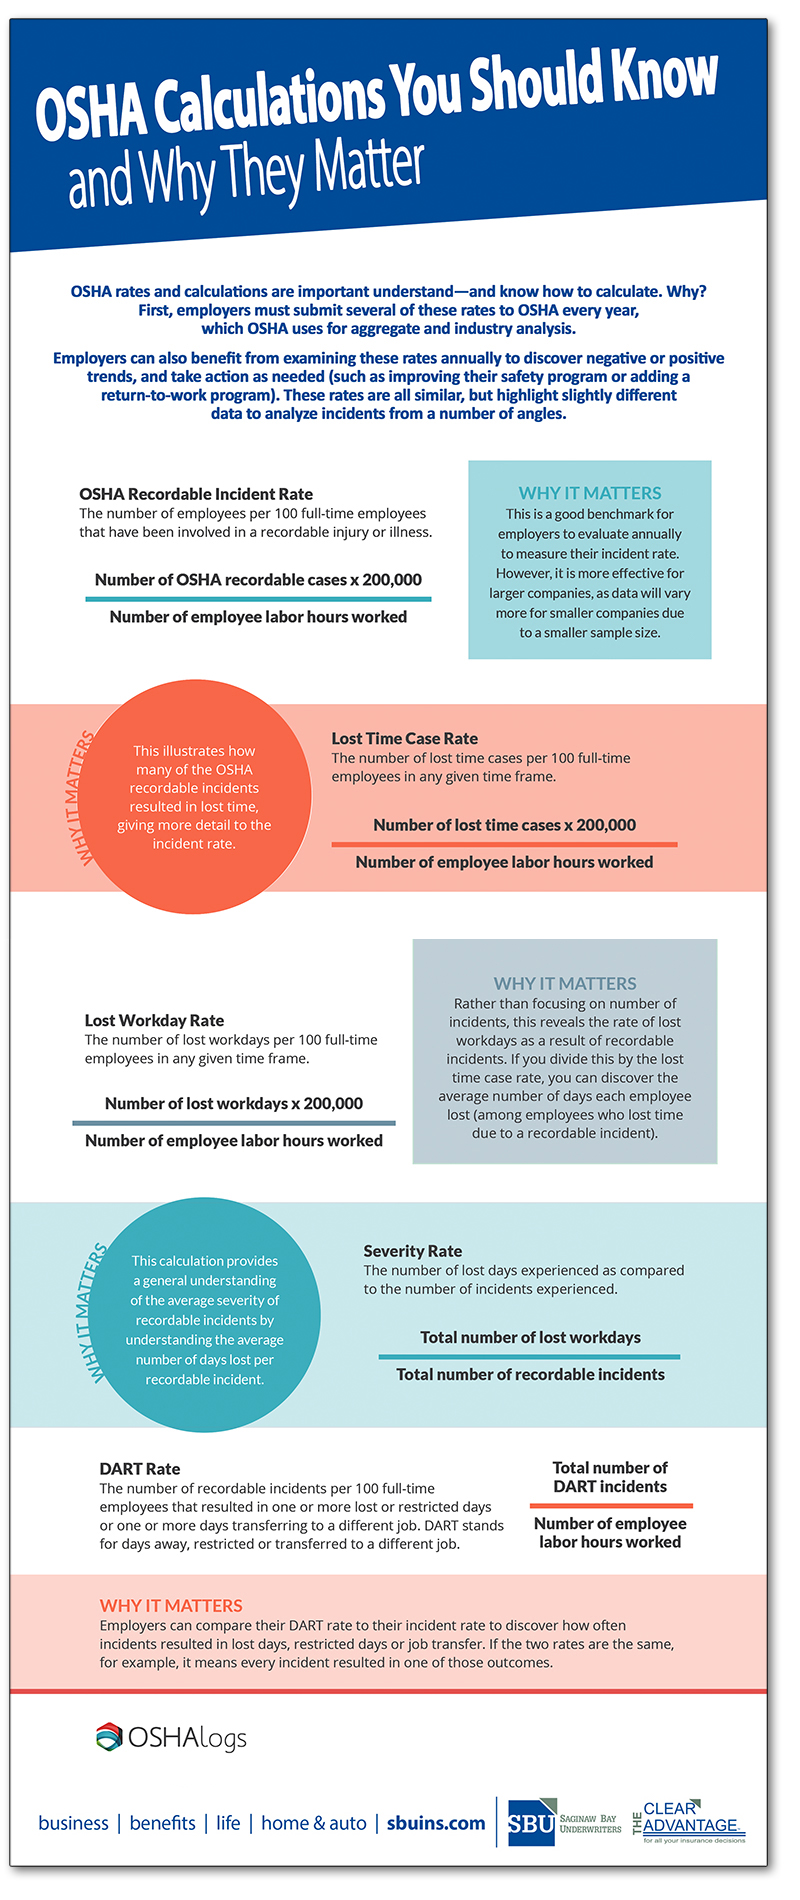 mikrobølgeovn opretholde bag OSHA Calculations You Should Know and Why They Matter [infographic] -  Saginaw Bay Underwriters